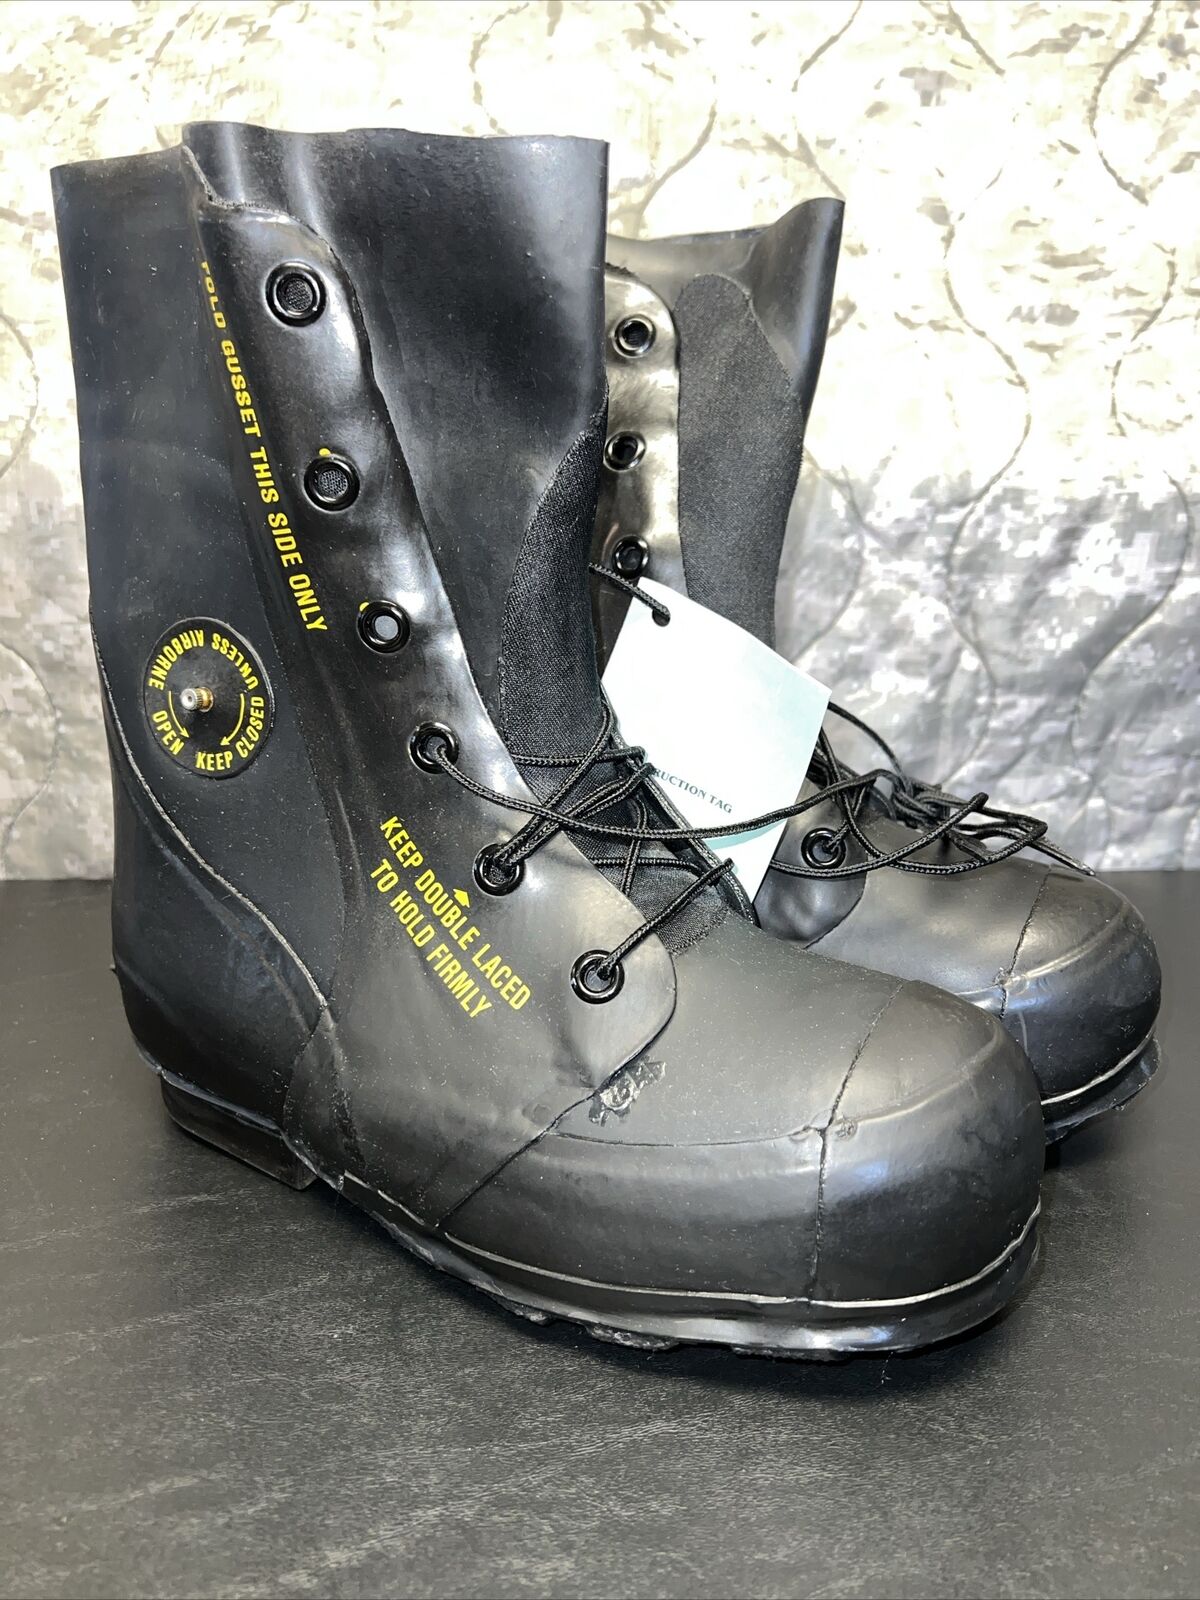 USGI Mickey Mouse Boots Extreme Cold Temperature Black 6R w/Valve New